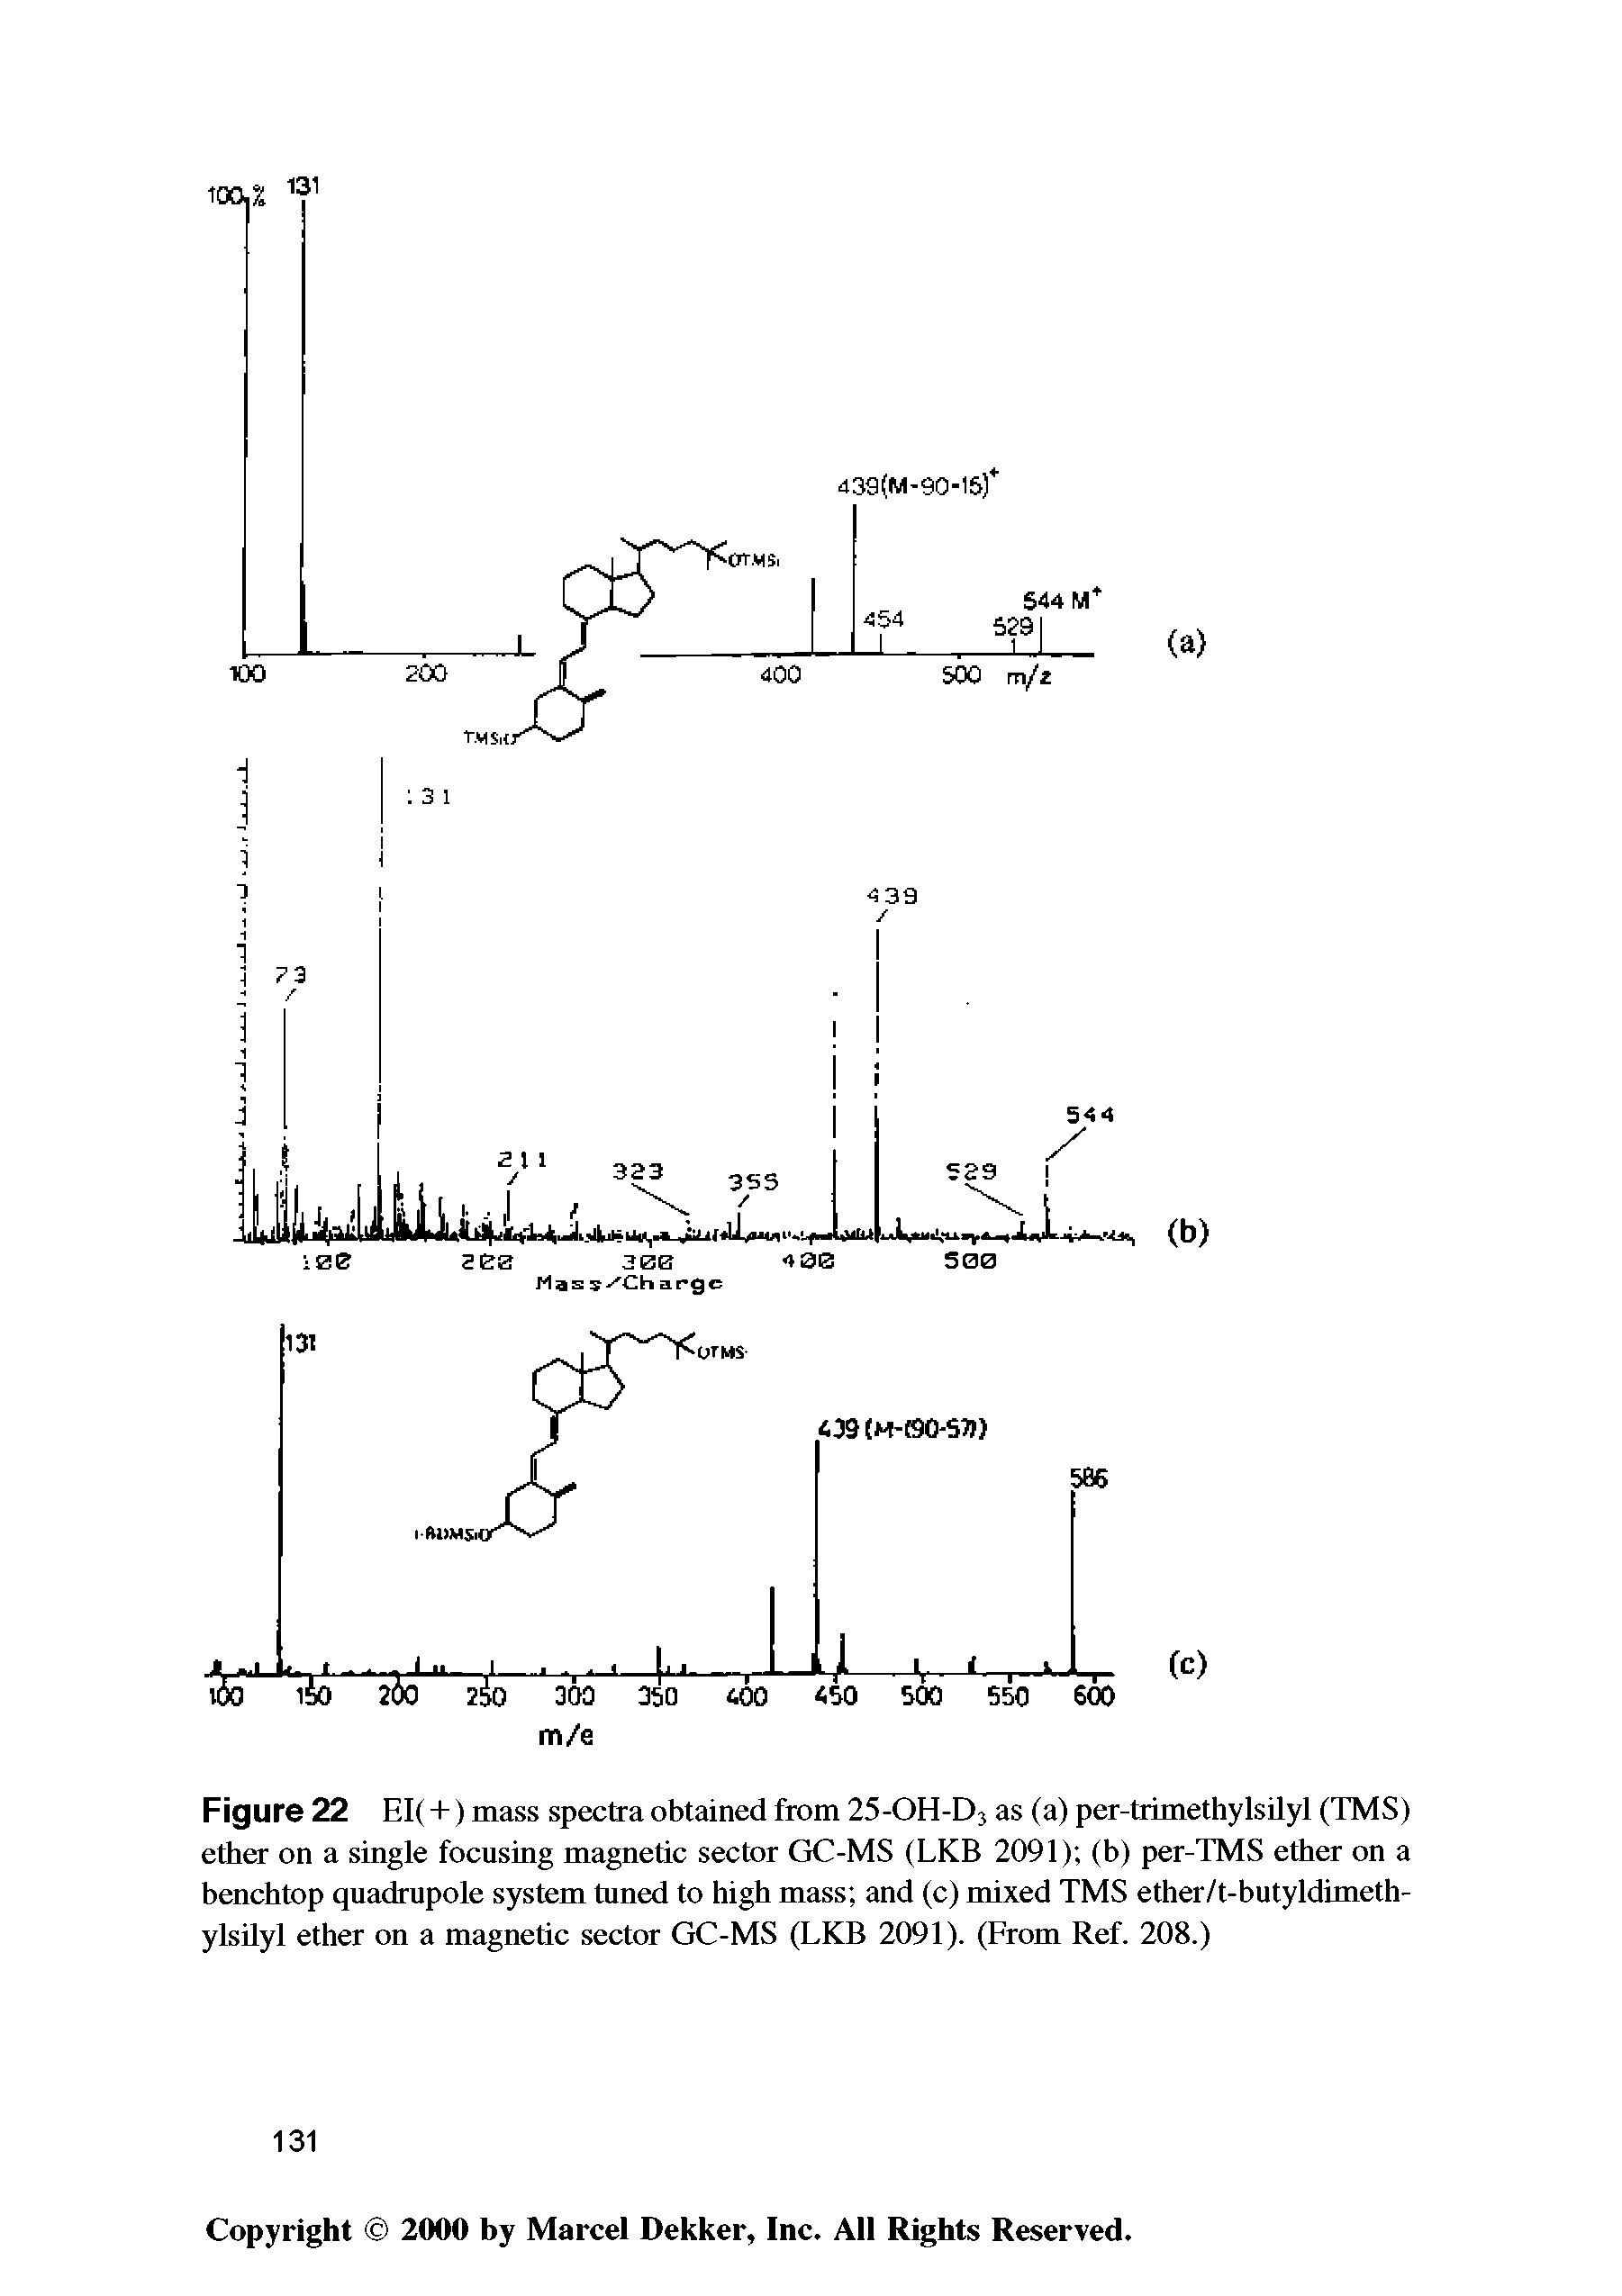 Figure 22 EI( +) mass spectra obtained from aS-OH-Dj as (a) per-trimethylsilyl (TMS) ether on a single focusing magnetic sector GC-MS (LKB 2091) (b) per-TMS ether on a benchtop quadrupole system tuned to high mass and (c) mixed TMS ether/t-butyldimeth-ylsUyl ether on a magnetic sector GC-MS (LKB 2091). (From Ref. 208.)...